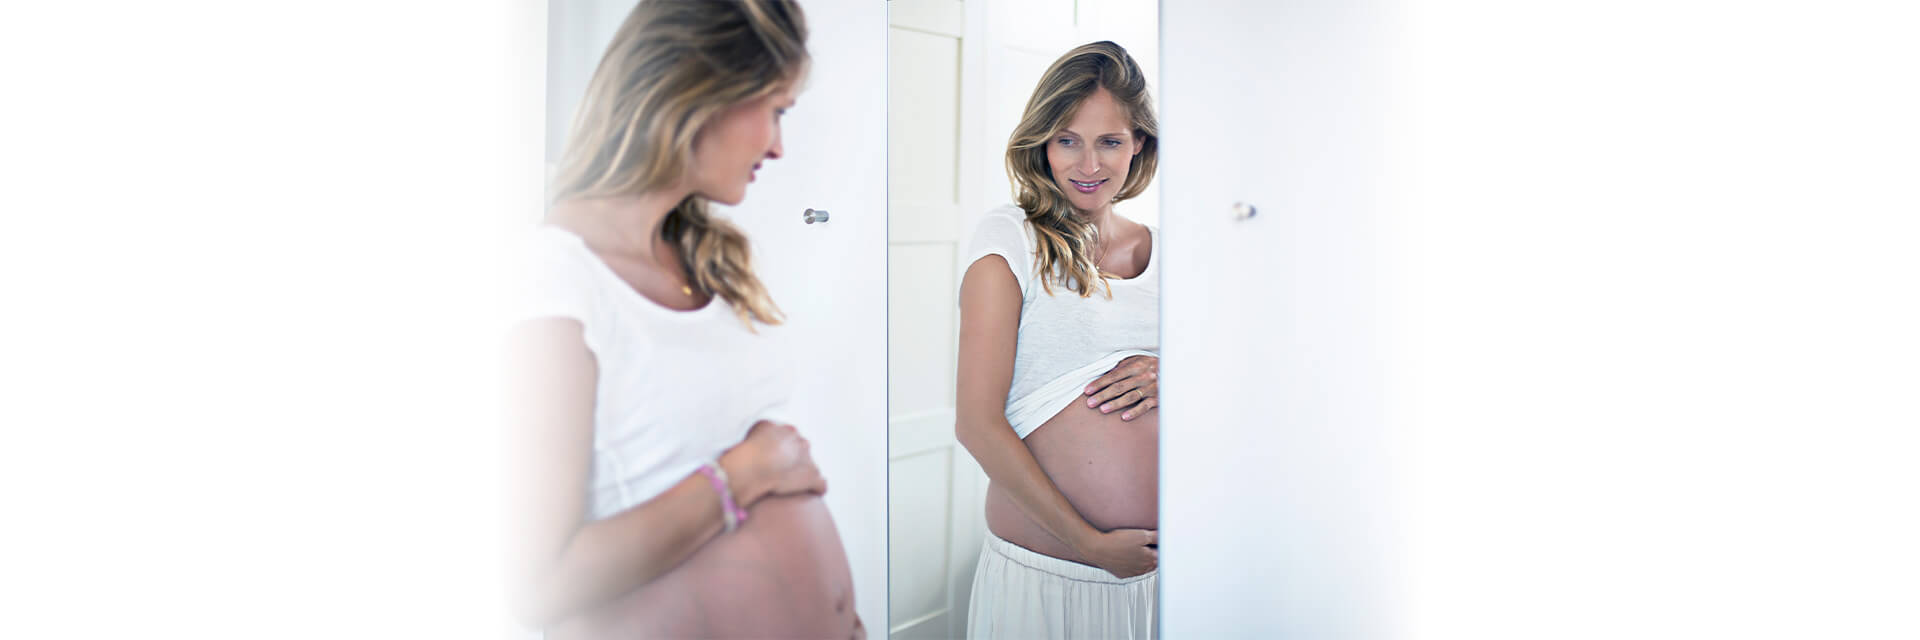 Pregnant woman in the mirror holding her belly